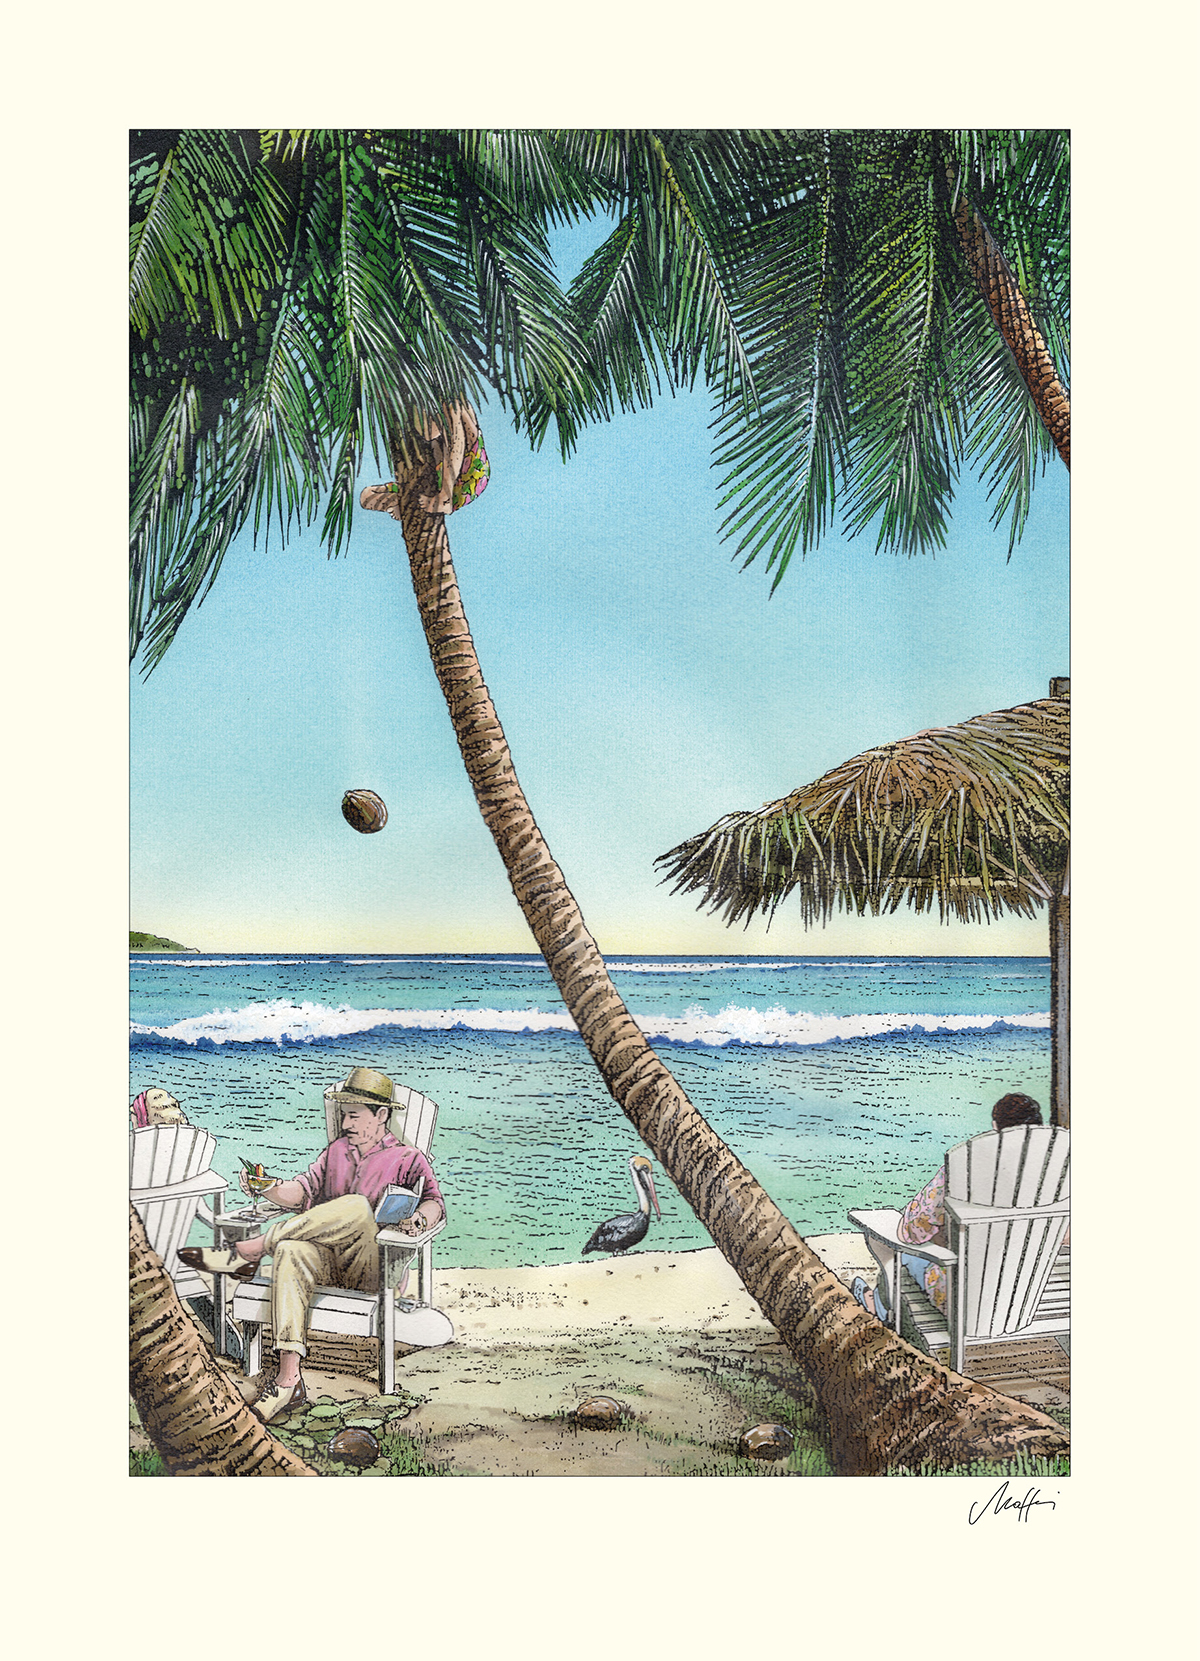 Fallin' coconut for Myers's Rum